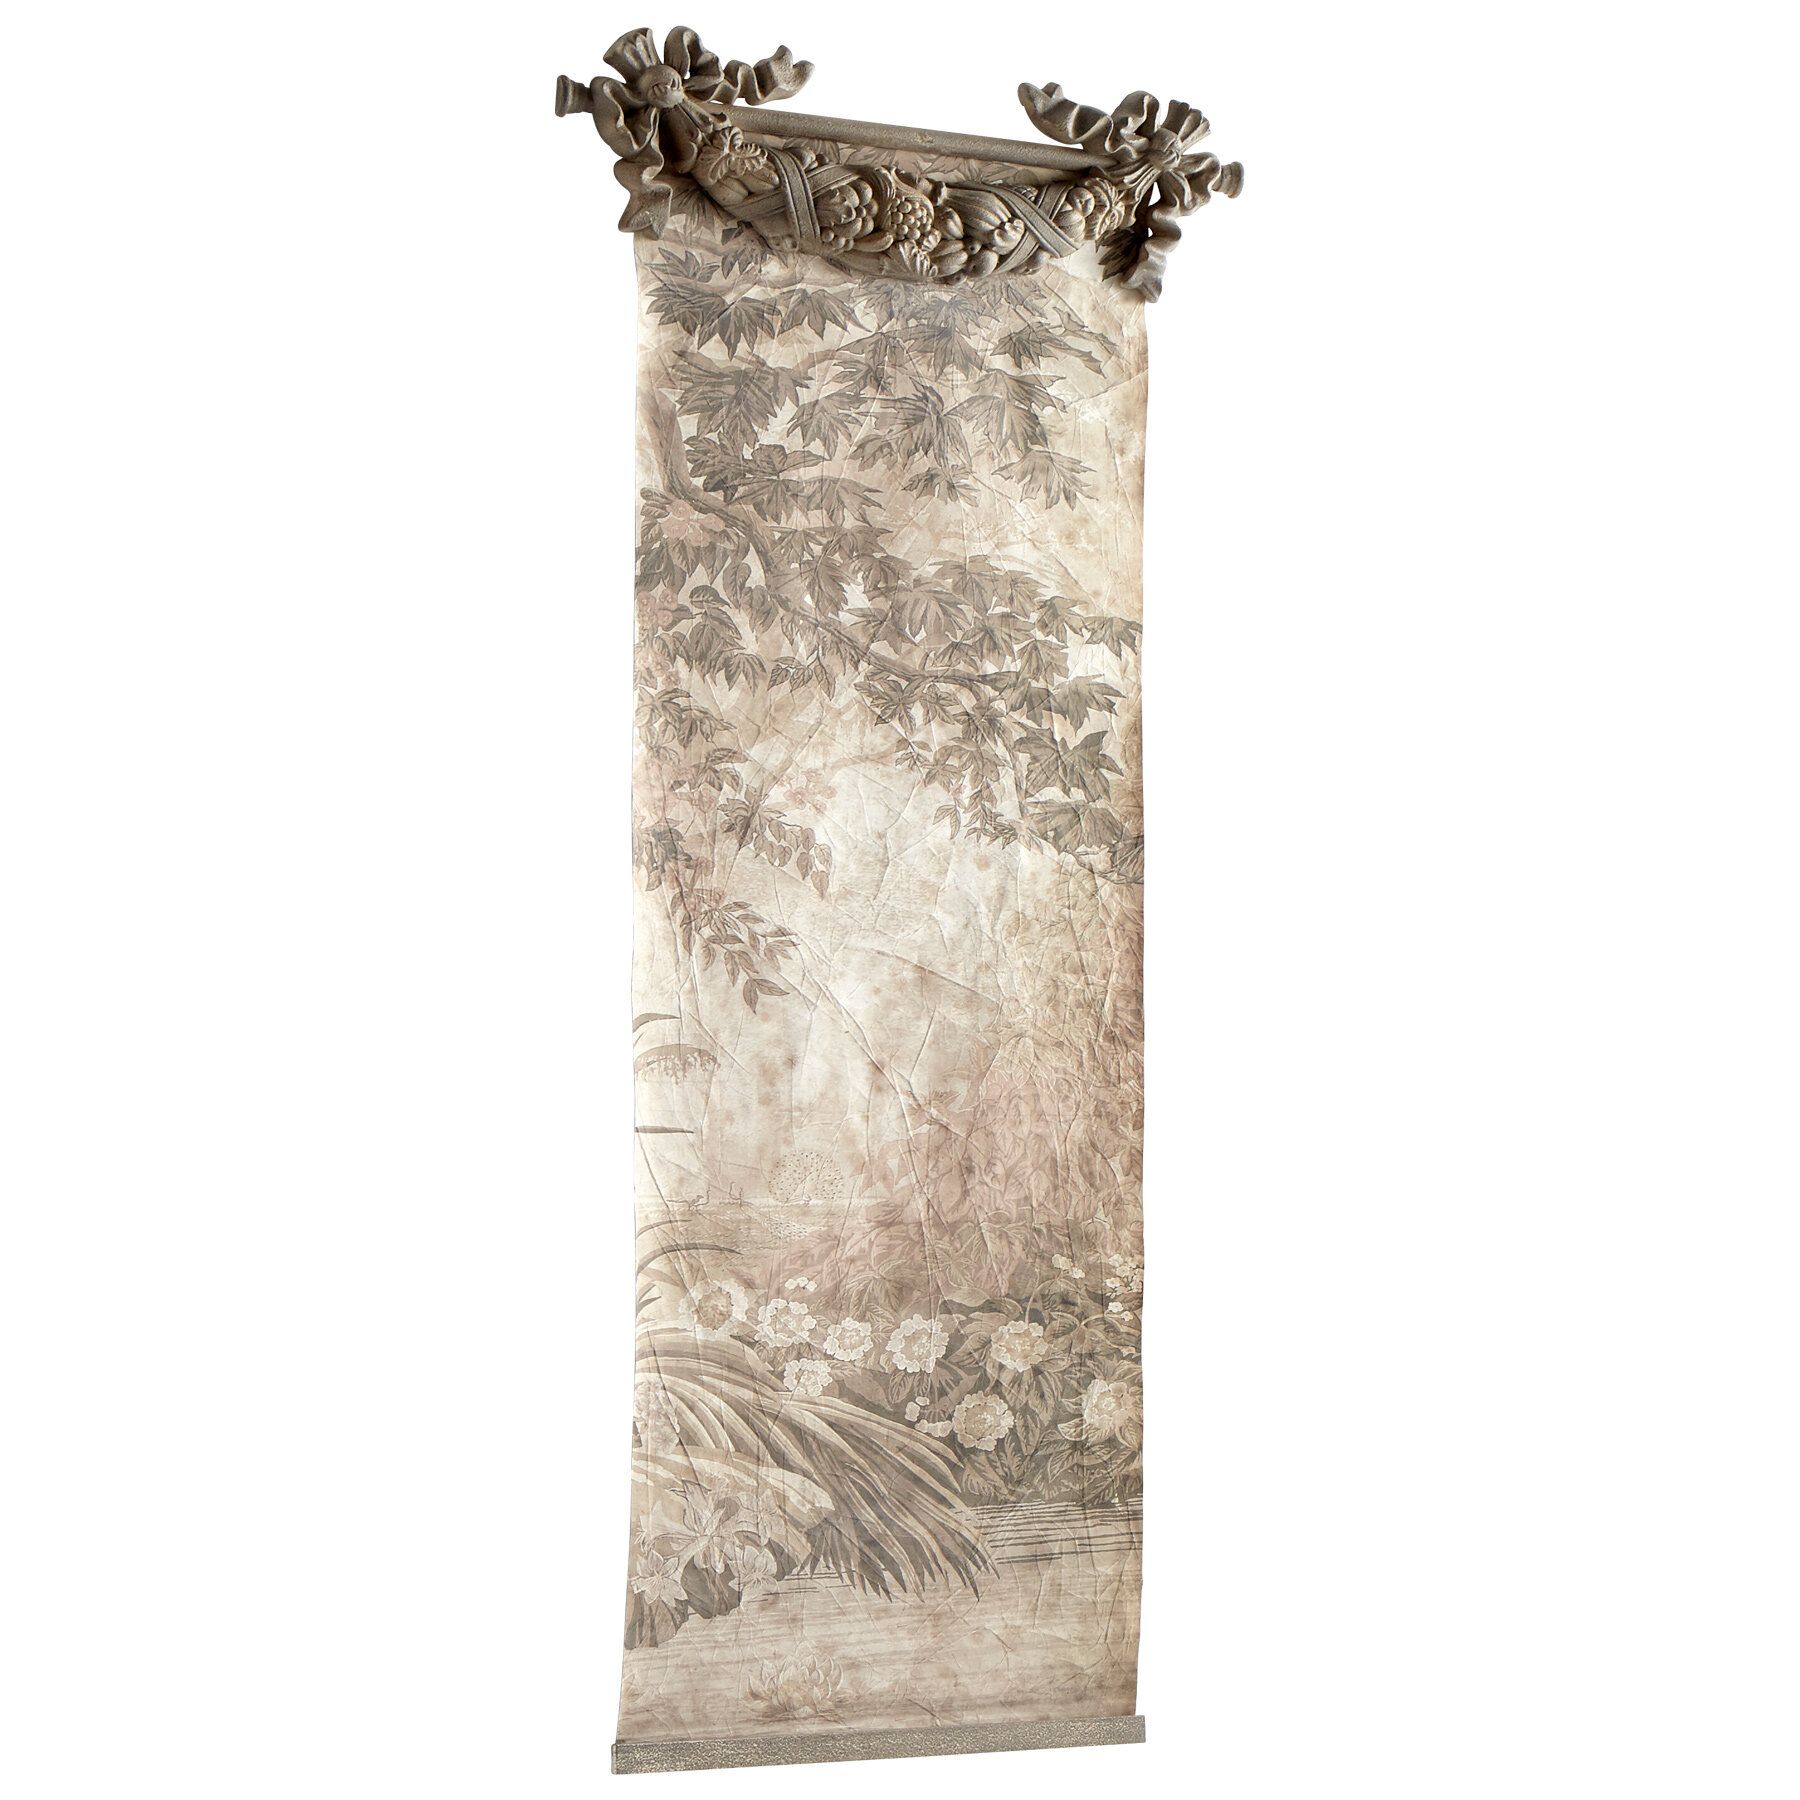 Blended Fabric Hidden Garden Chinoiserie Wall Hanging With Rod Within Most Popular Blended Fabric Wall Hangings (View 19 of 20)